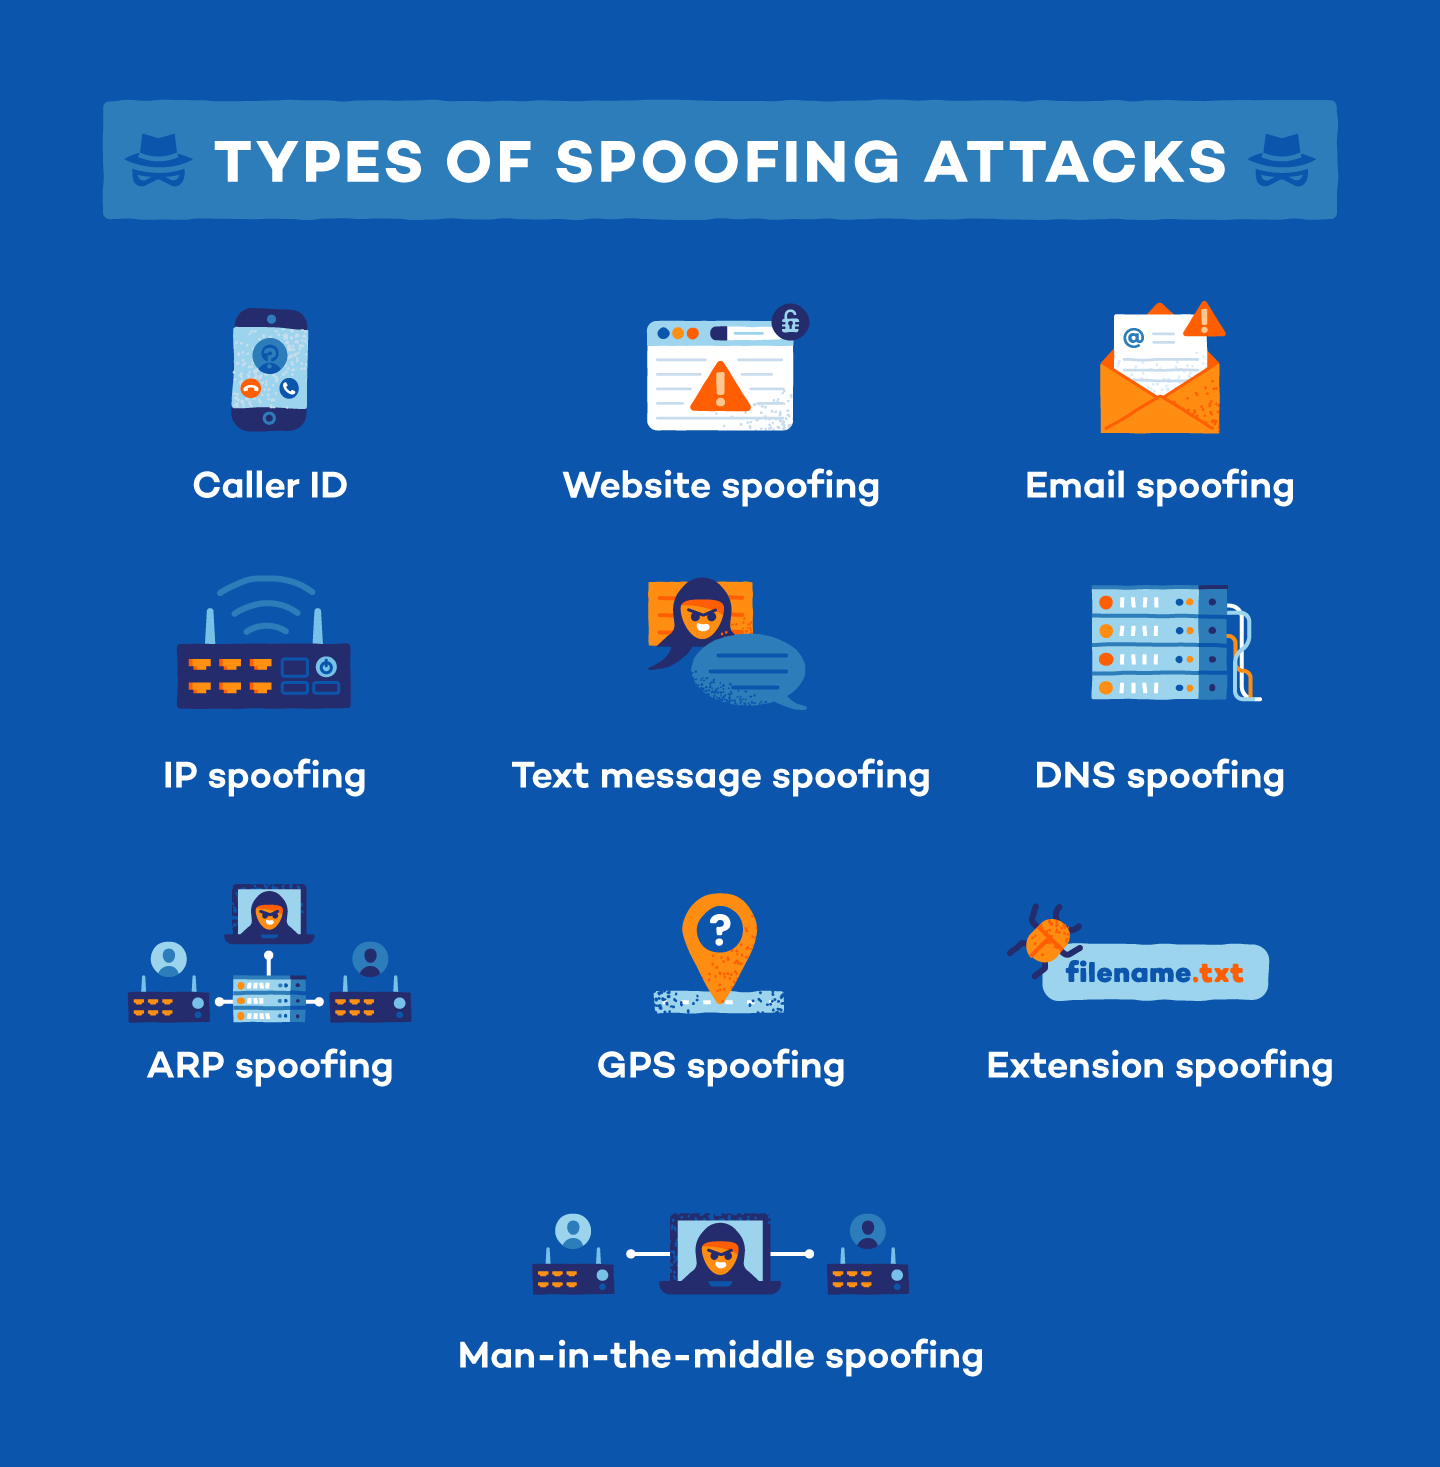 An illustration showing the different types of spoofing attacks